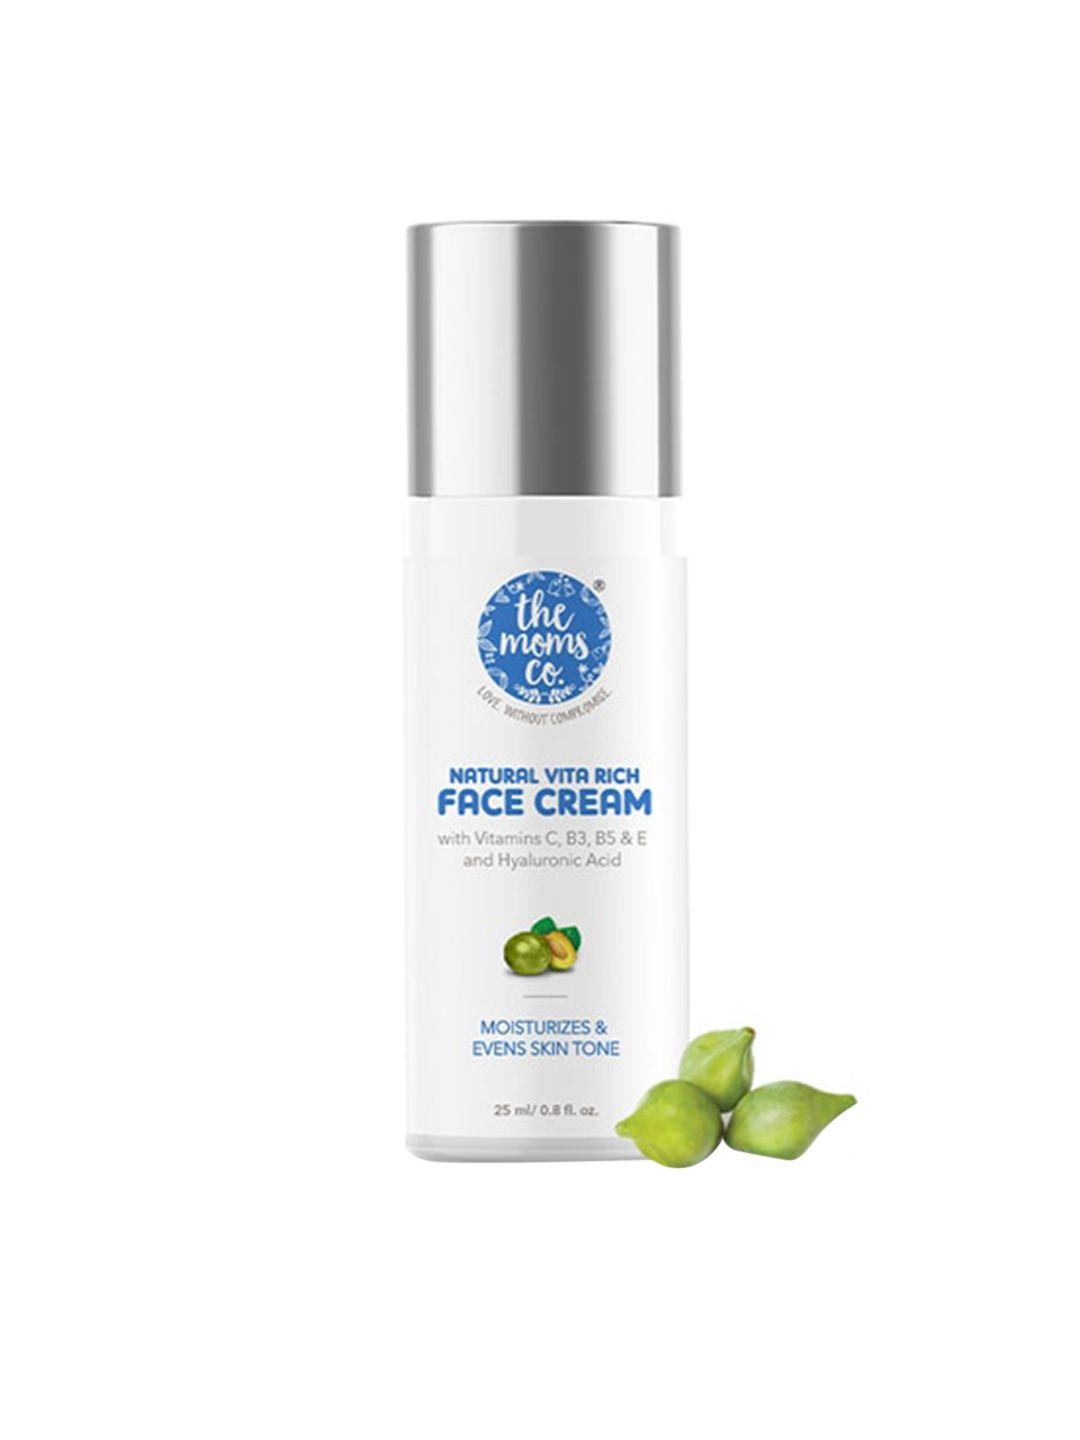 the moms co. natural vita rich face cream with vitamin c & hyaluronic acid - 25 ml